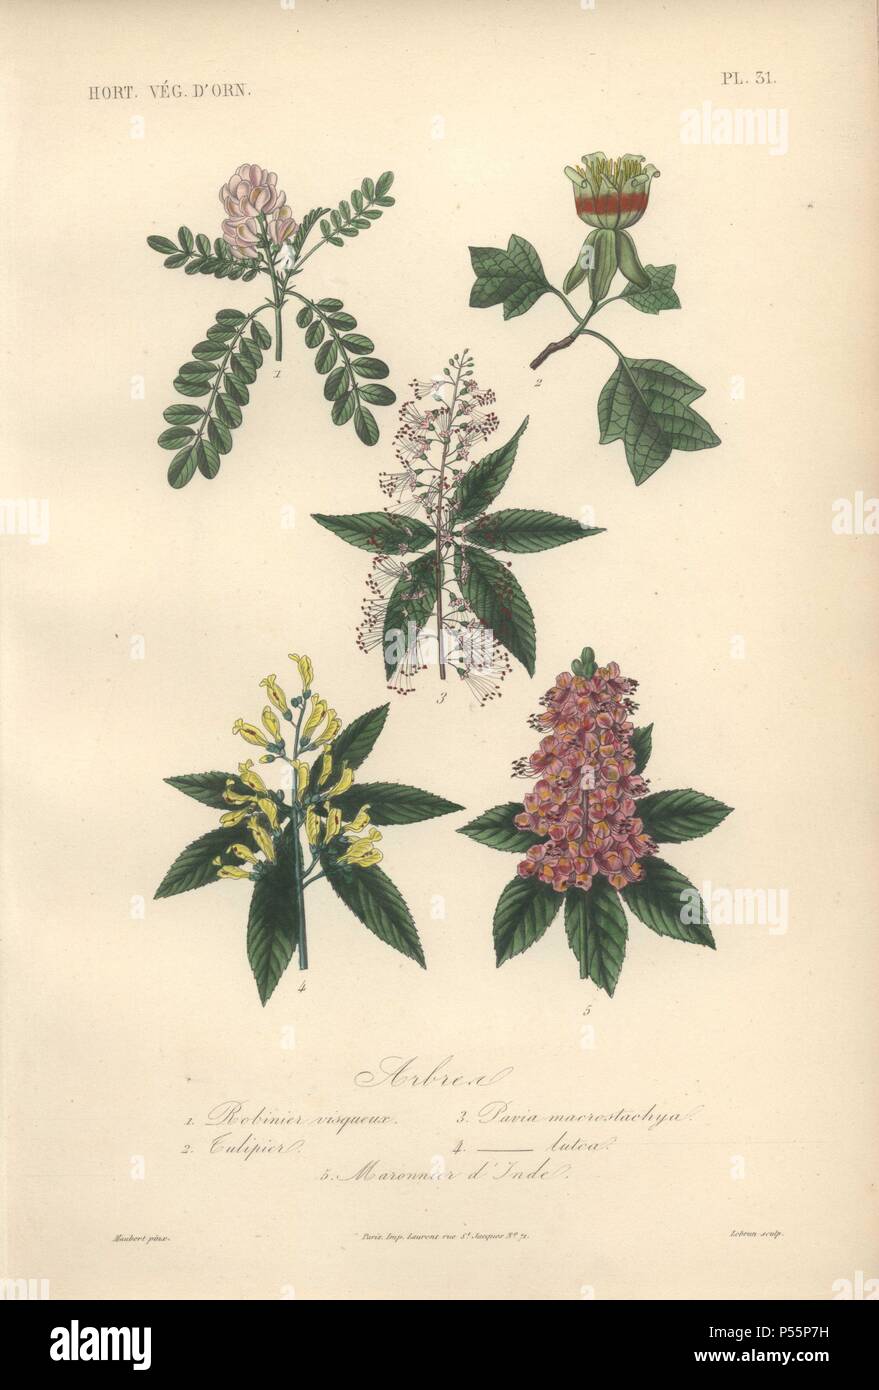 Five trees, including pink locust tree, green and crimson tulip tree, white red buckeye, yellow red buckeye (Aesculus pavia), and purple horse chestnut (Aesculus hippocastum).. 1) Robinier Visqueux 2) Tulipier 3) Pavia Macrostachya 4) Pavia Lutea 5) Maronnier d'Inde . Handcolored lithograph by Edouard Maubert for Herincq's 'Le Regne Vegetal' (1865). Stock Photo